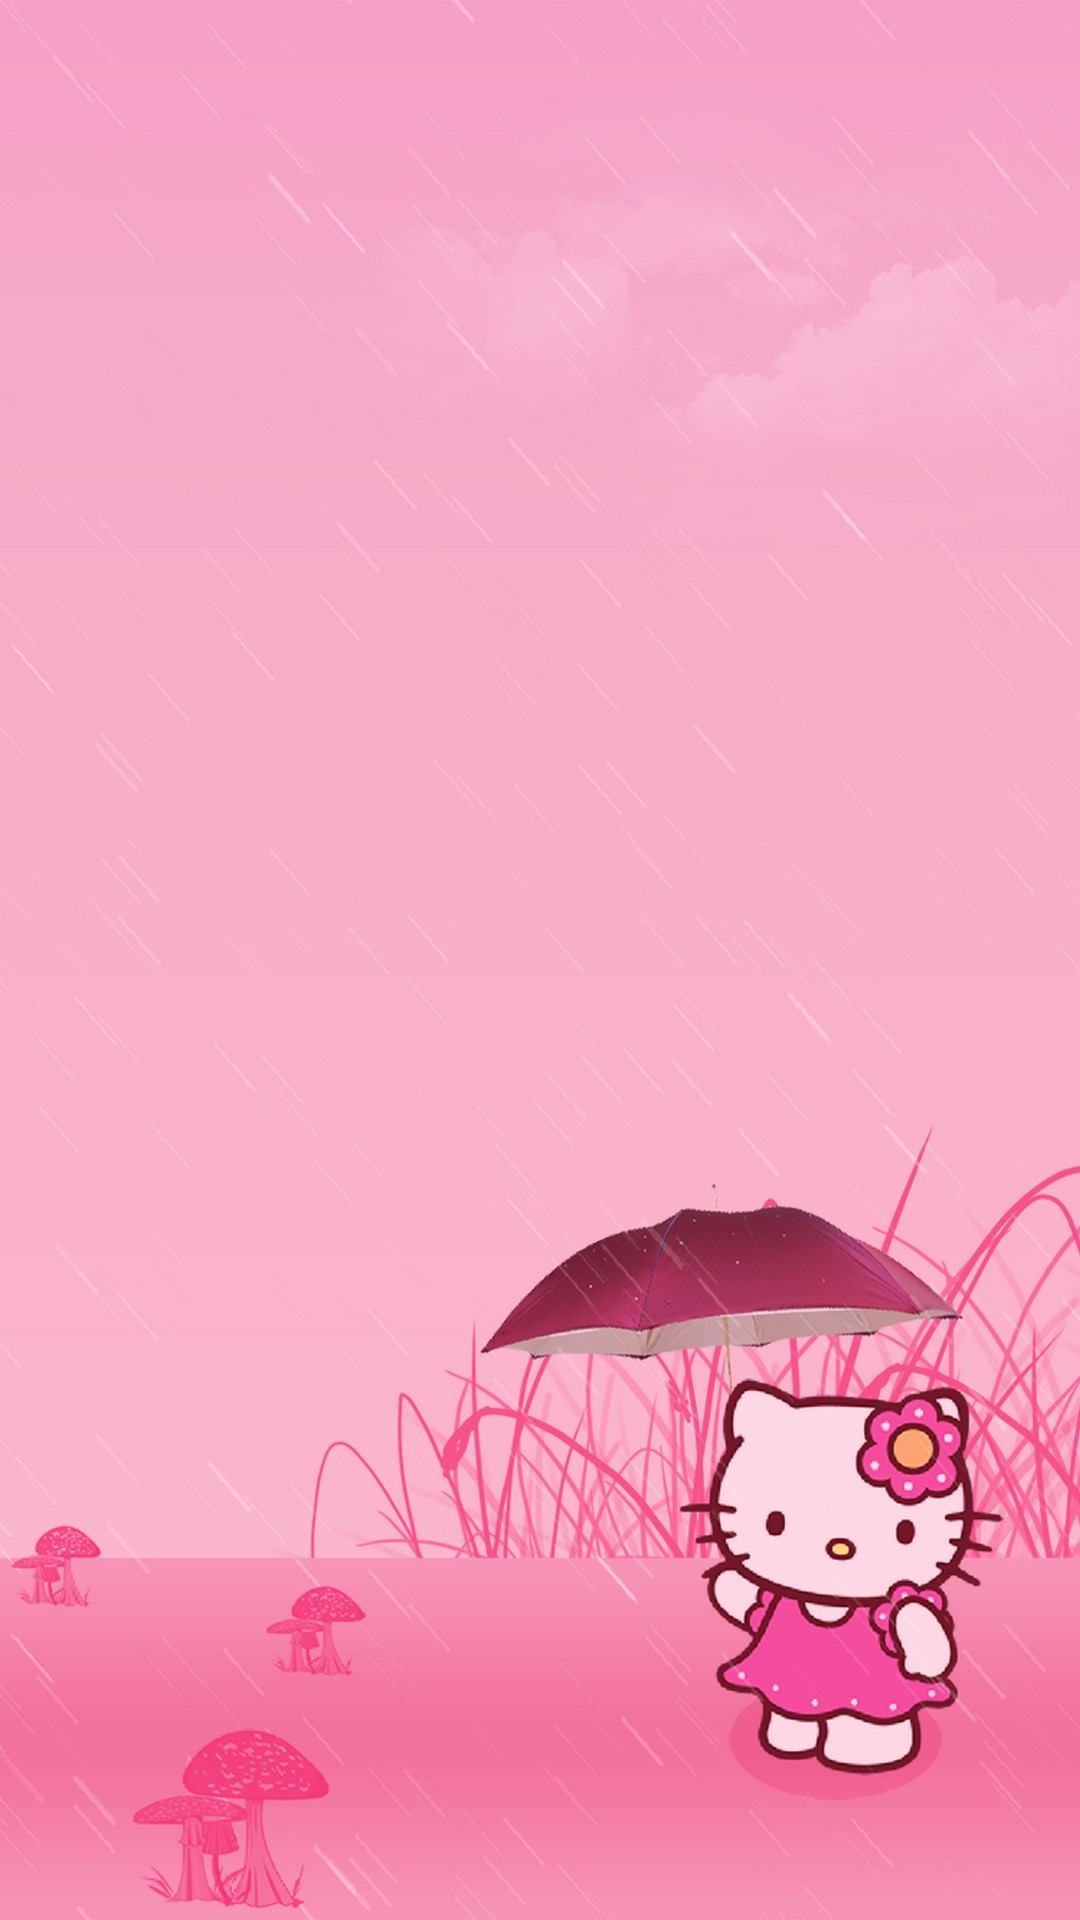 iPhone X Wallpaper Sanrio Hello Kitty with image resolution 1080x1920 pixel. You can make this wallpaper for your iPhone 5, 6, 7, 8, X backgrounds, Mobile Screensaver, or iPad Lock Screen